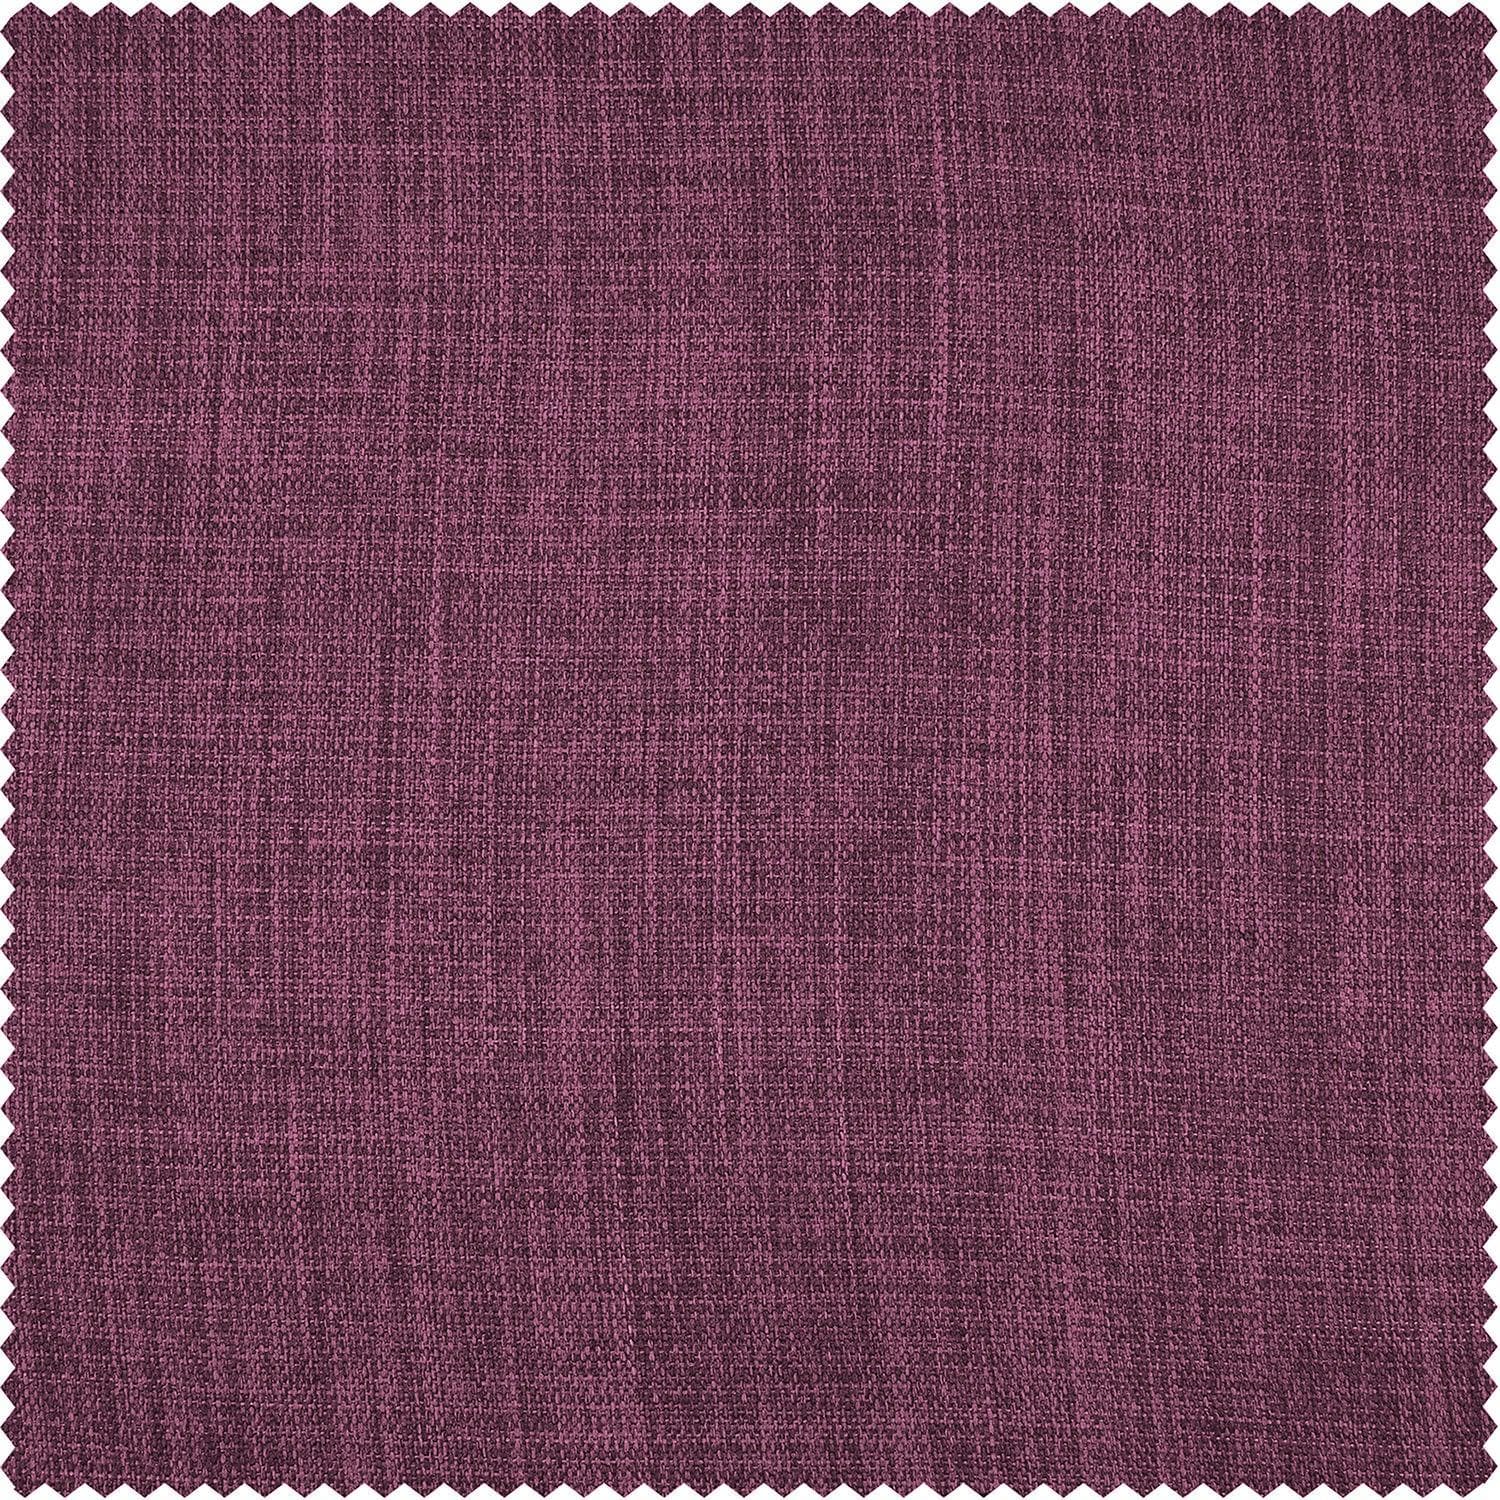 Mullberry Textured Faux Linen Swatch